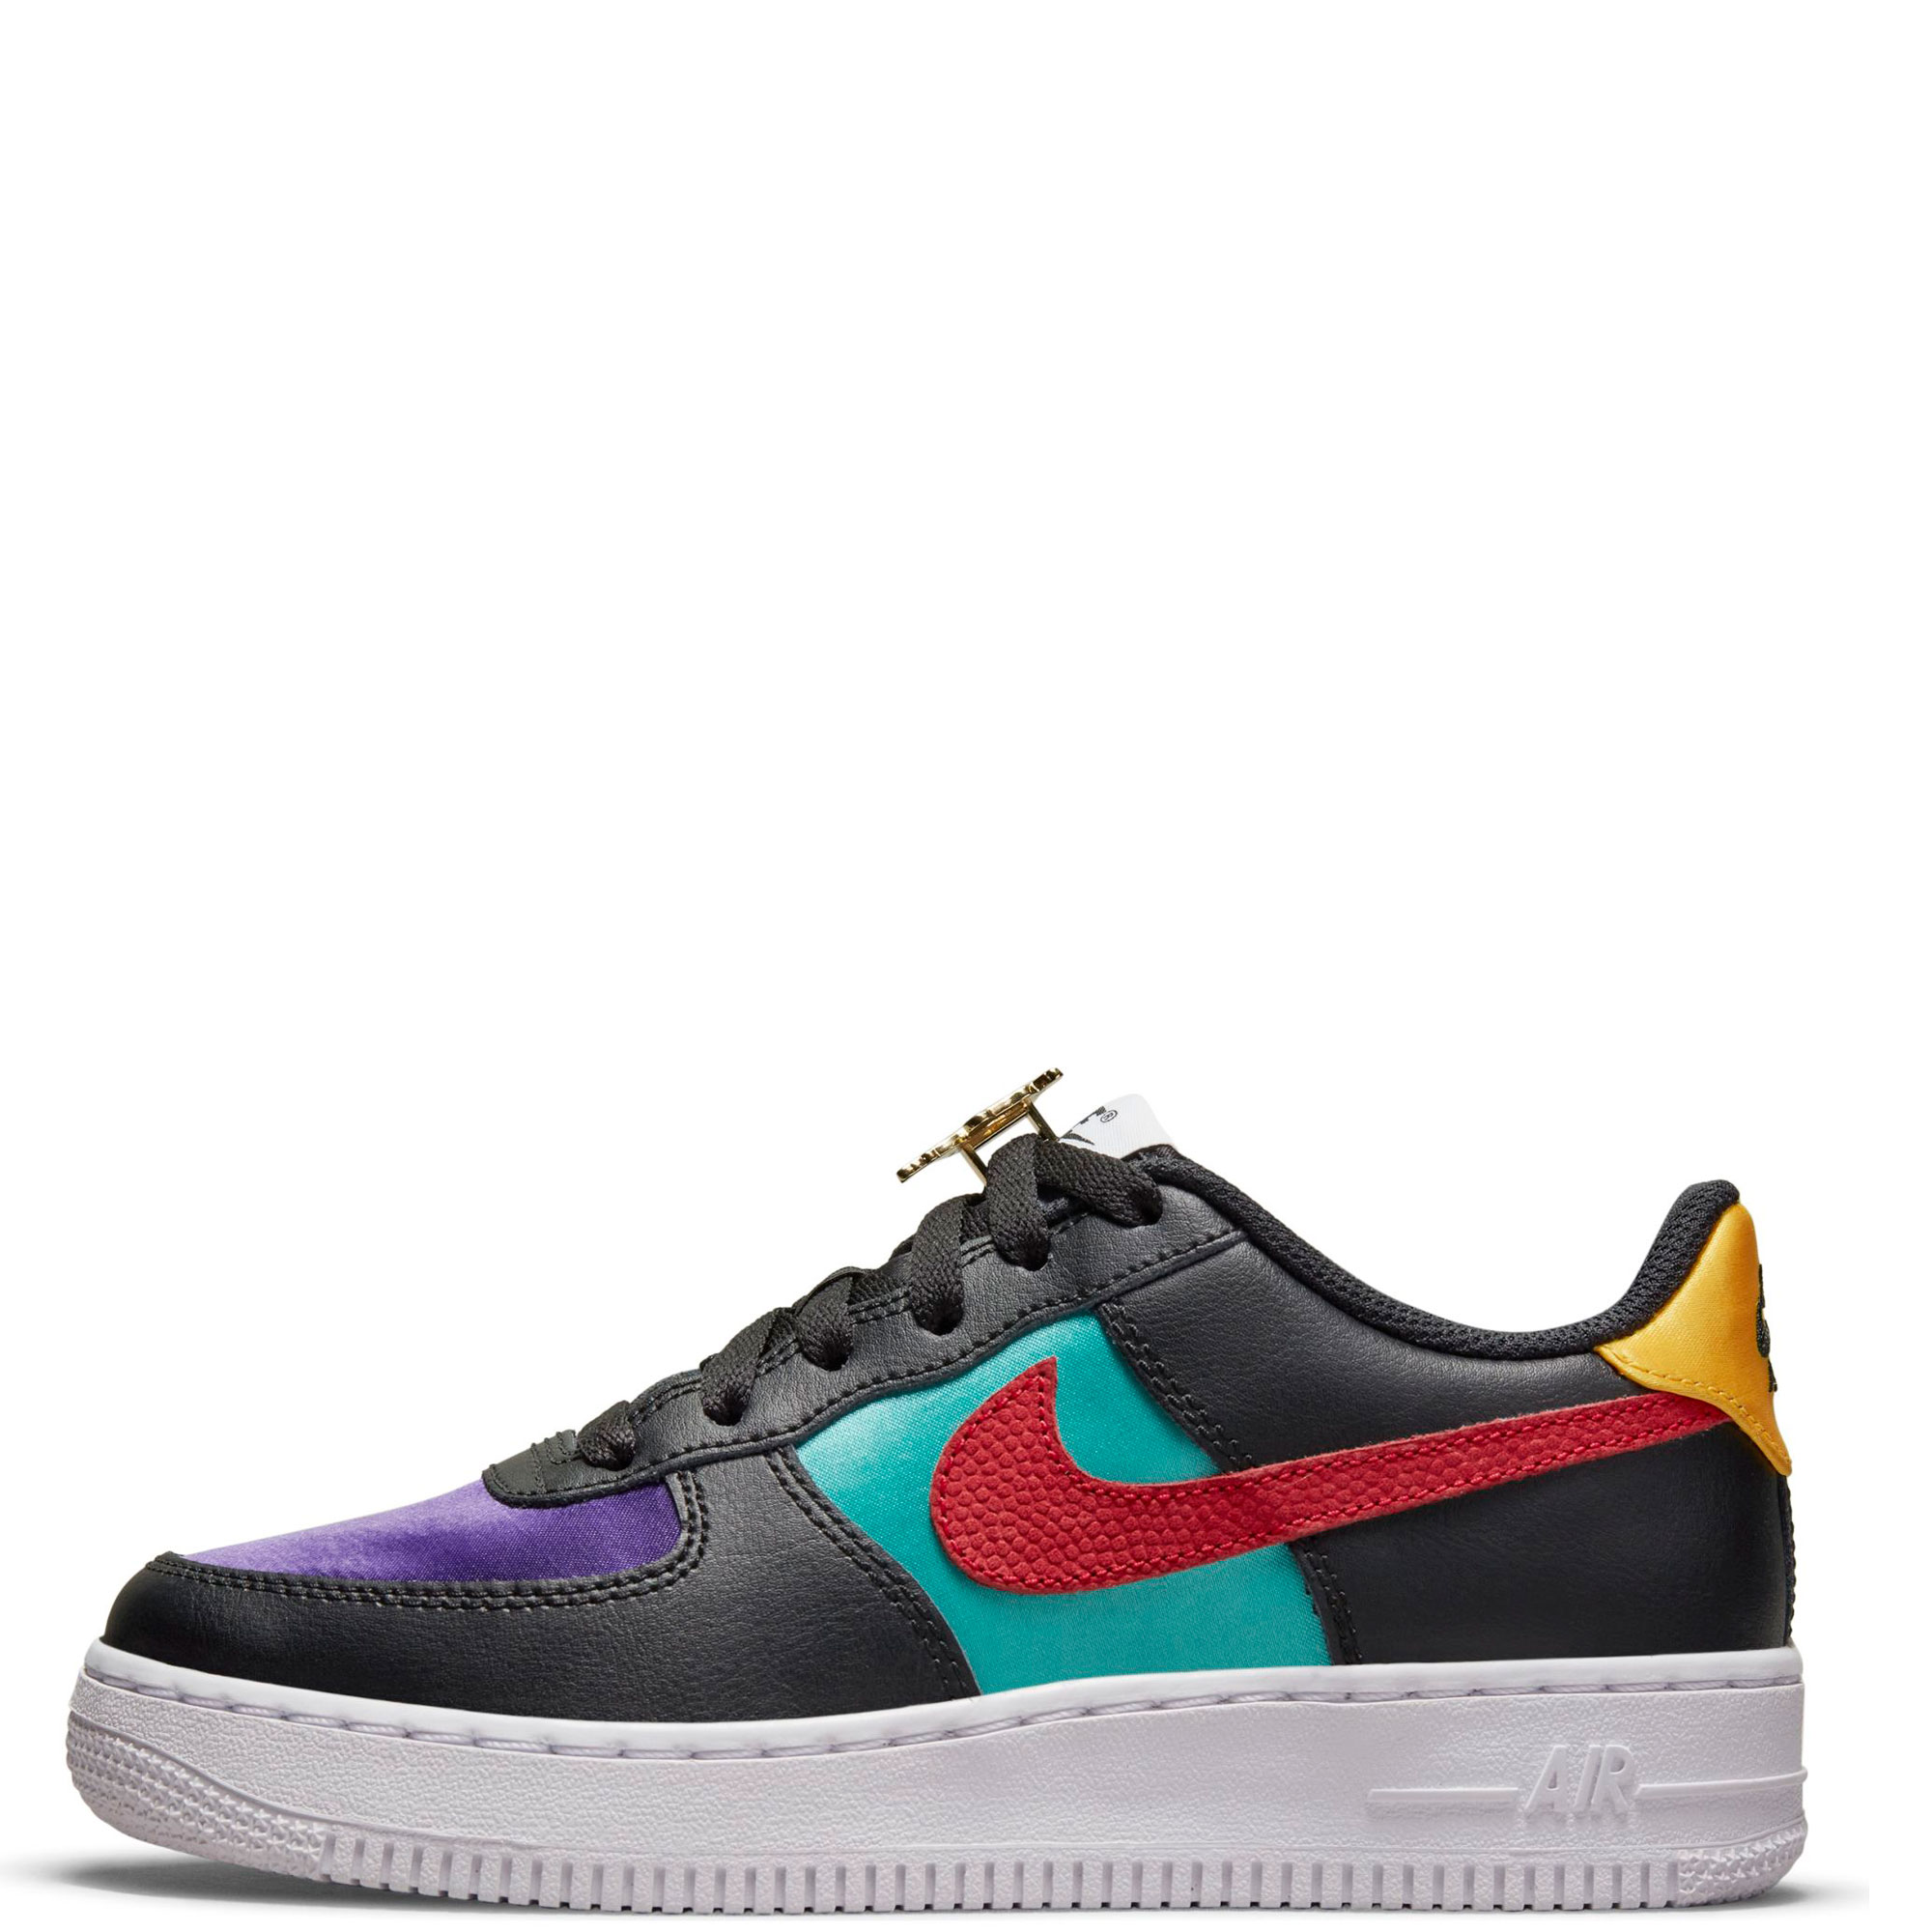 Nike Air Force 1 '07 LV8 EMB Court Purple Review! 